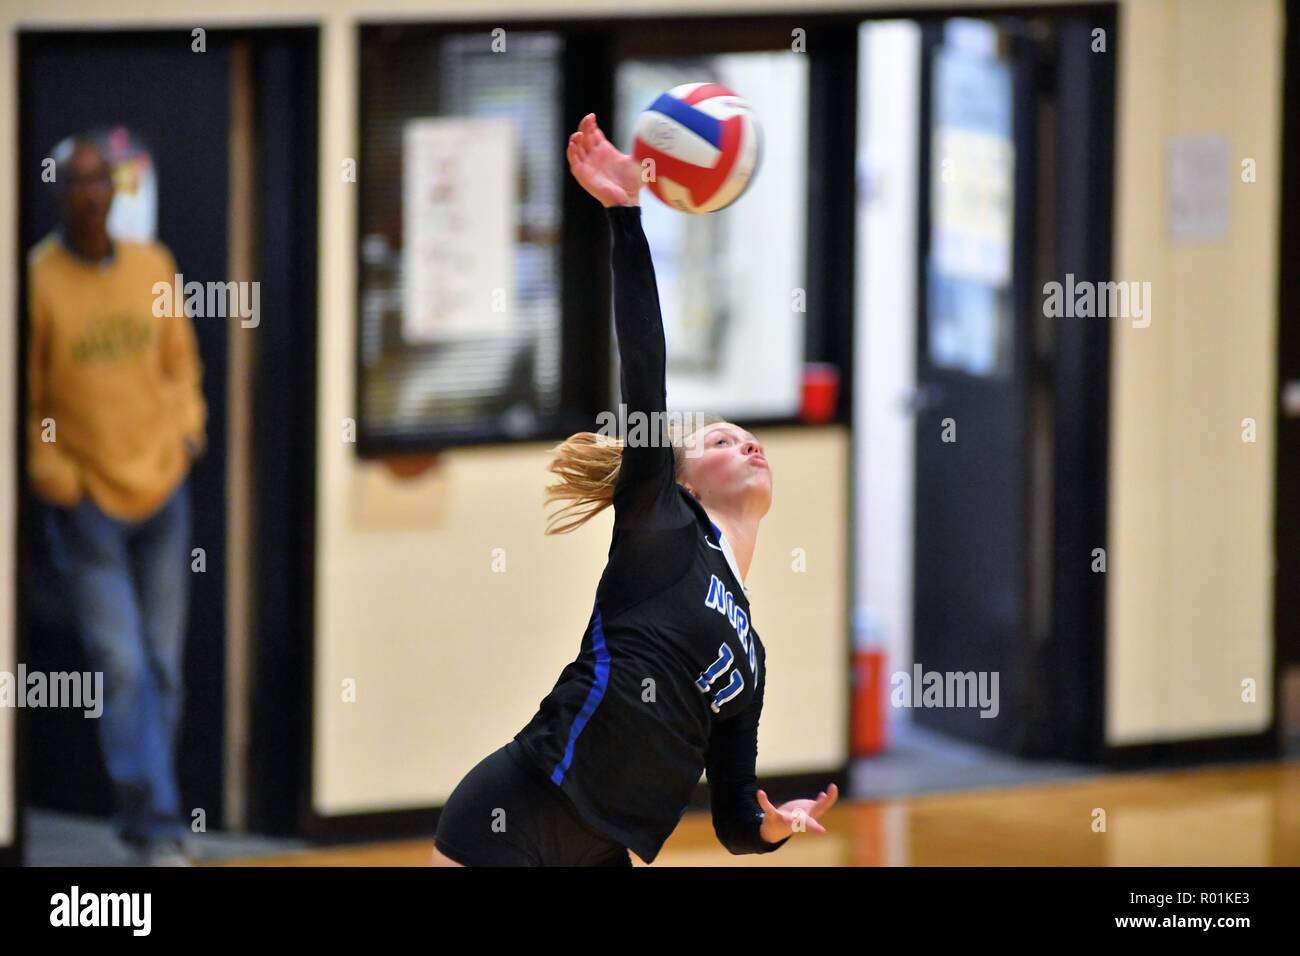 Player delivering a power serve during a high school match. USA. Stock Photo